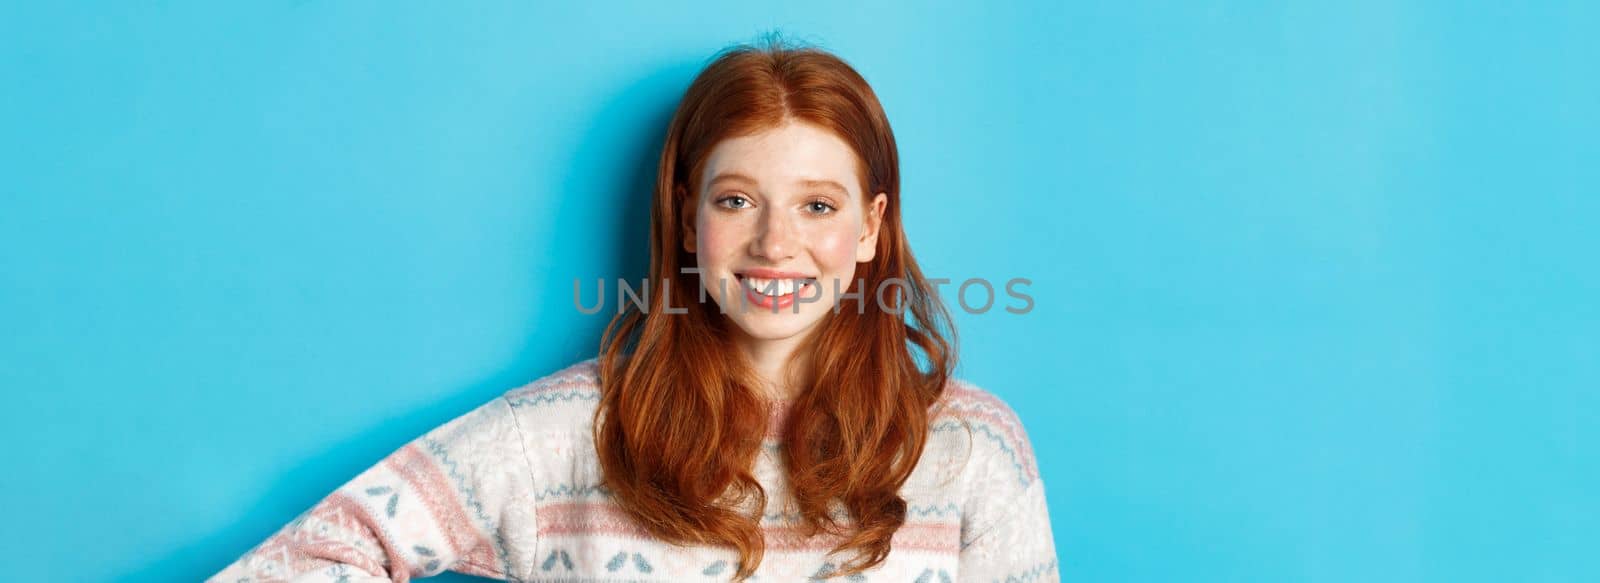 Close-up of attractive female student with red hair, wearing winter sweater, smiling happy and staring at camera, blue background.